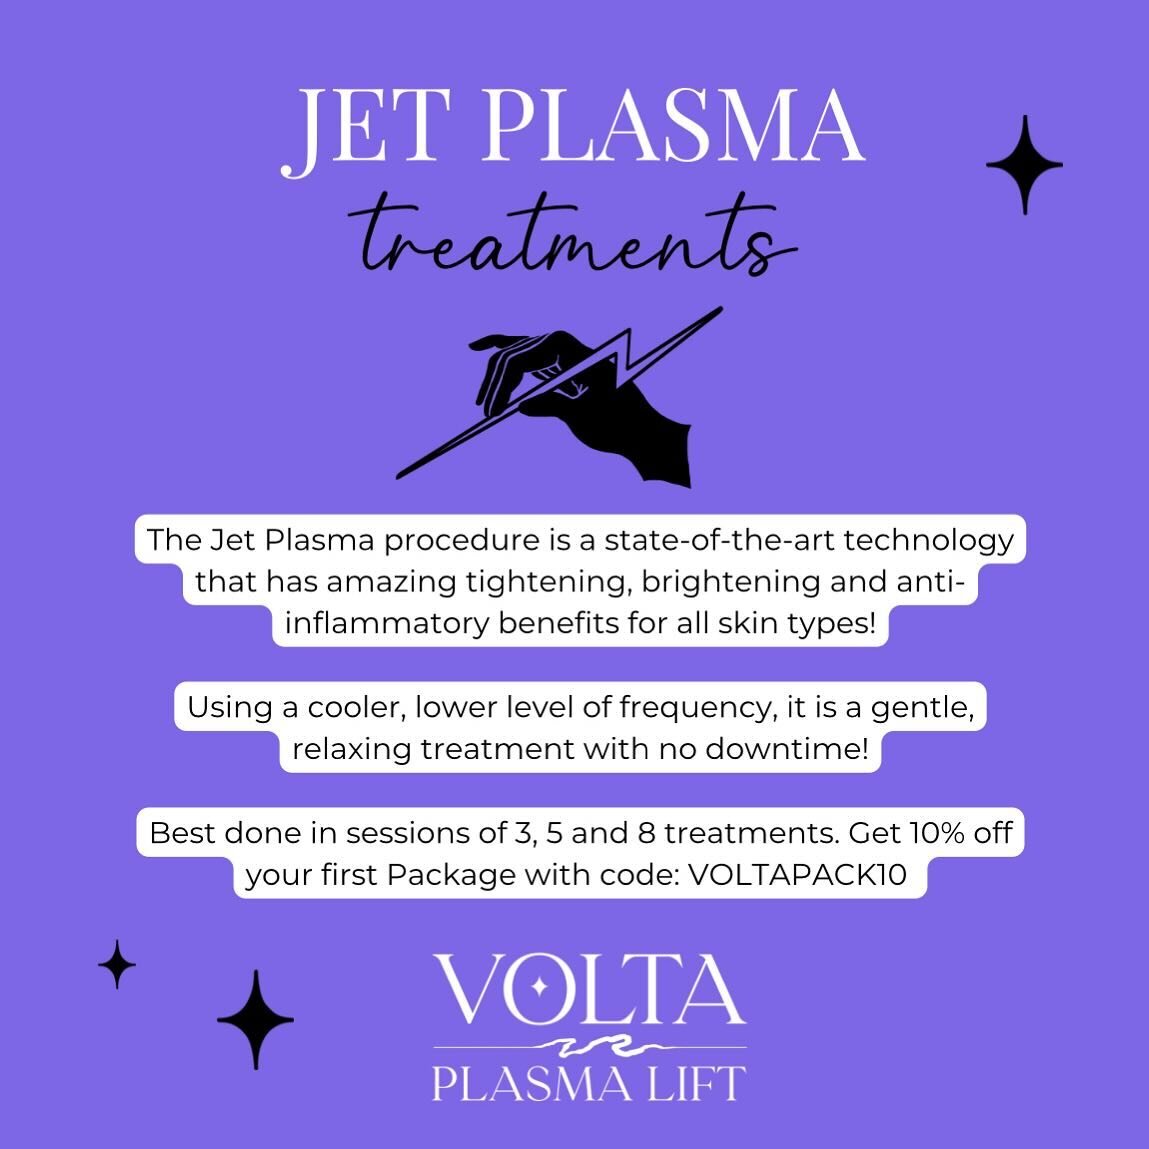 Write a caption... Glowing skin is IN for Spring! Boost Collagen, lift, tighten and brighten the skin with easy peasy Jet Plasma treatments. I have 10% off always on your first series of Jet, cuz I love you!! ✨ Alicia 

💜 Jet Plasma is a totally non